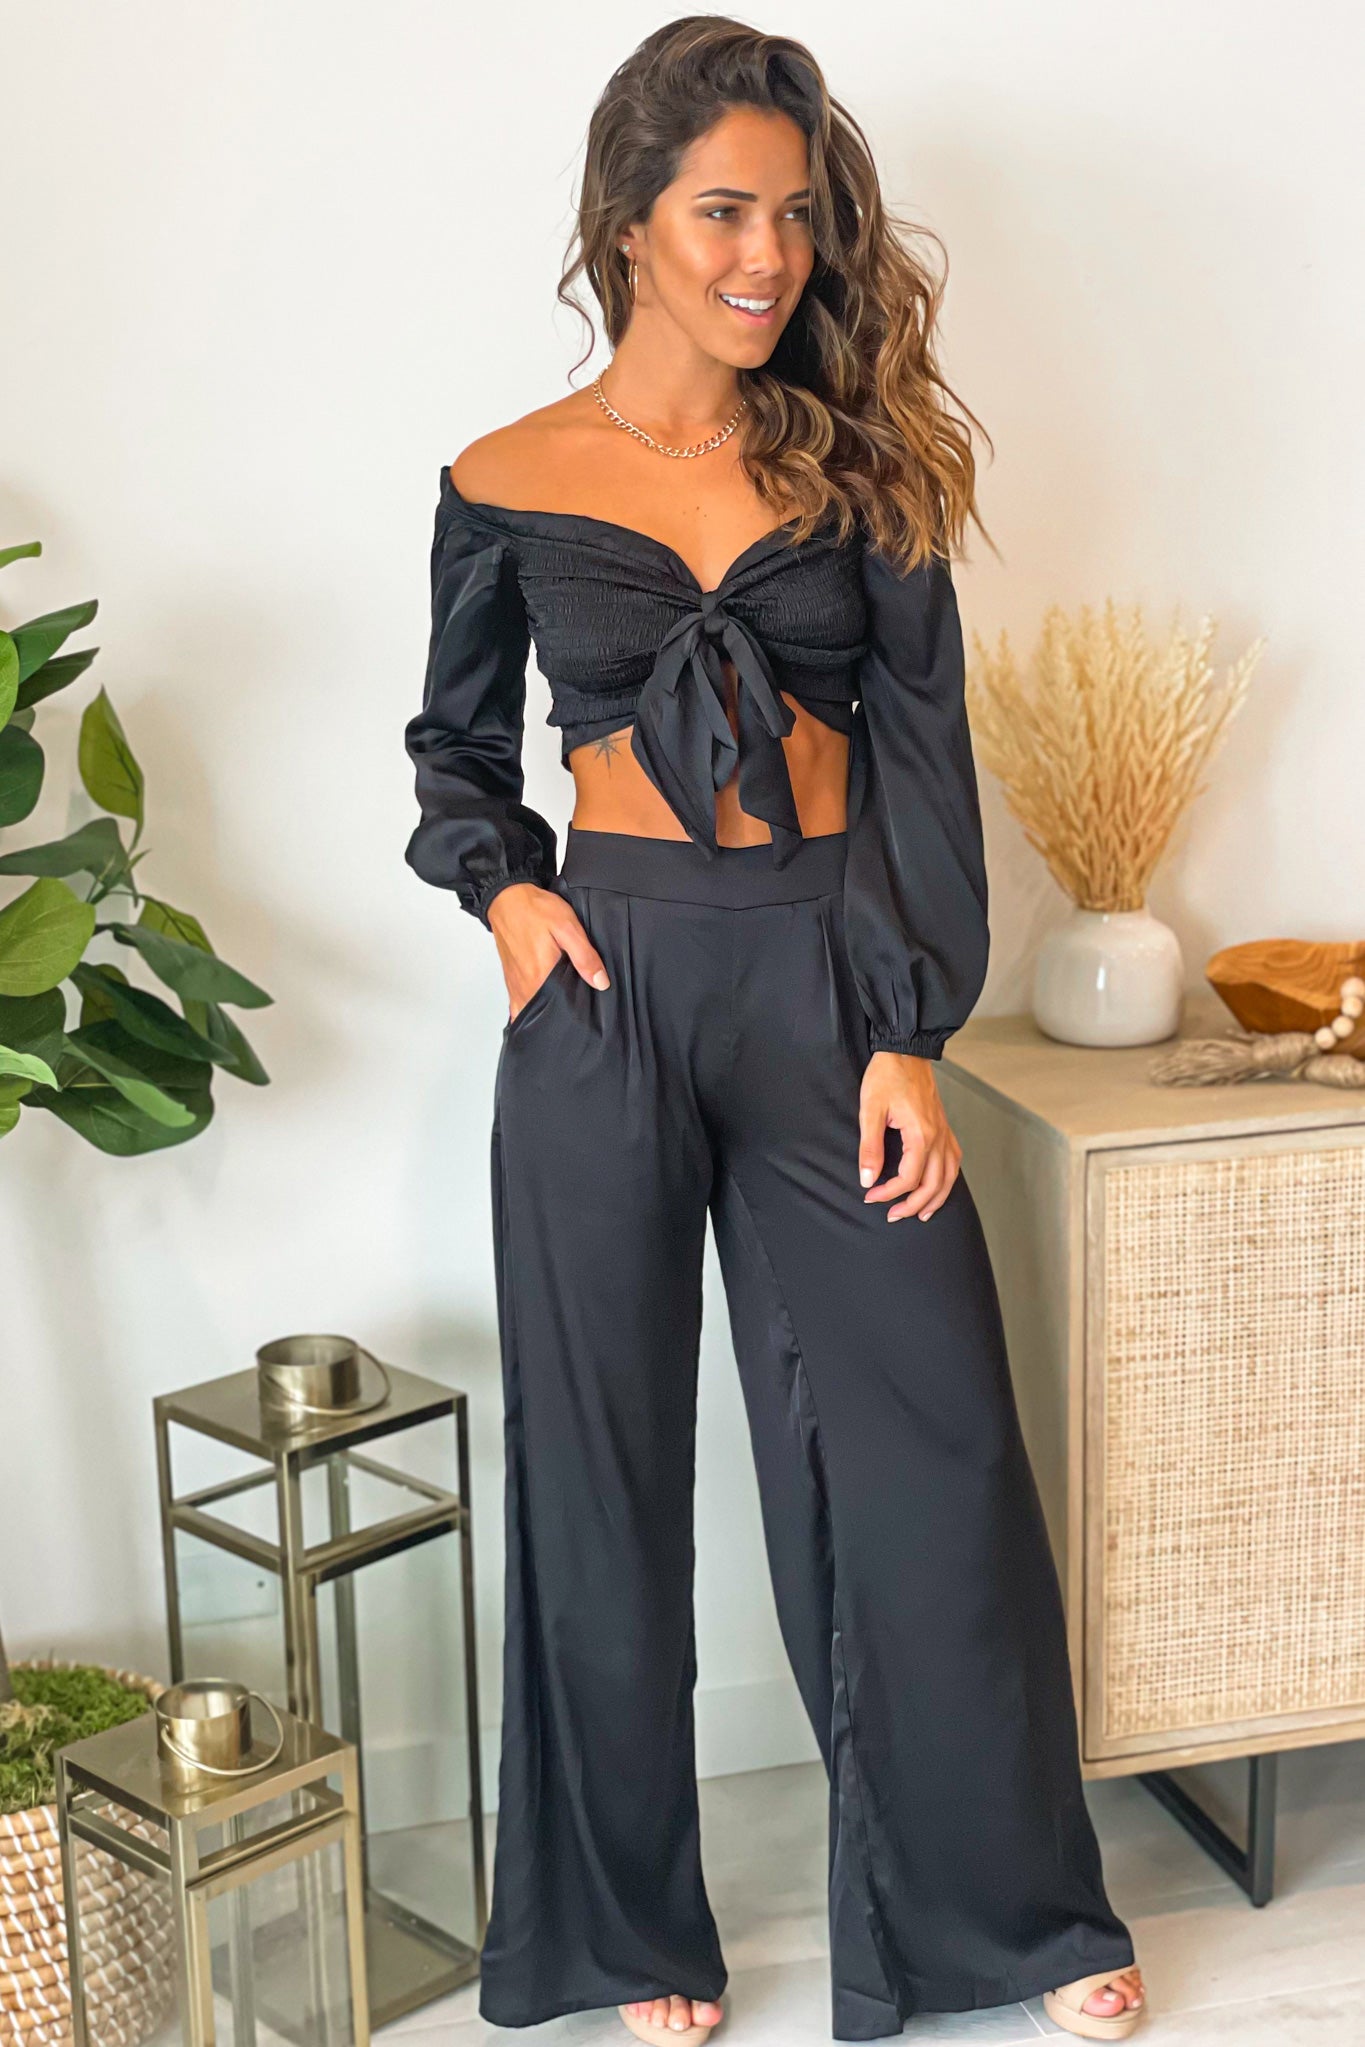 black two piece outfit